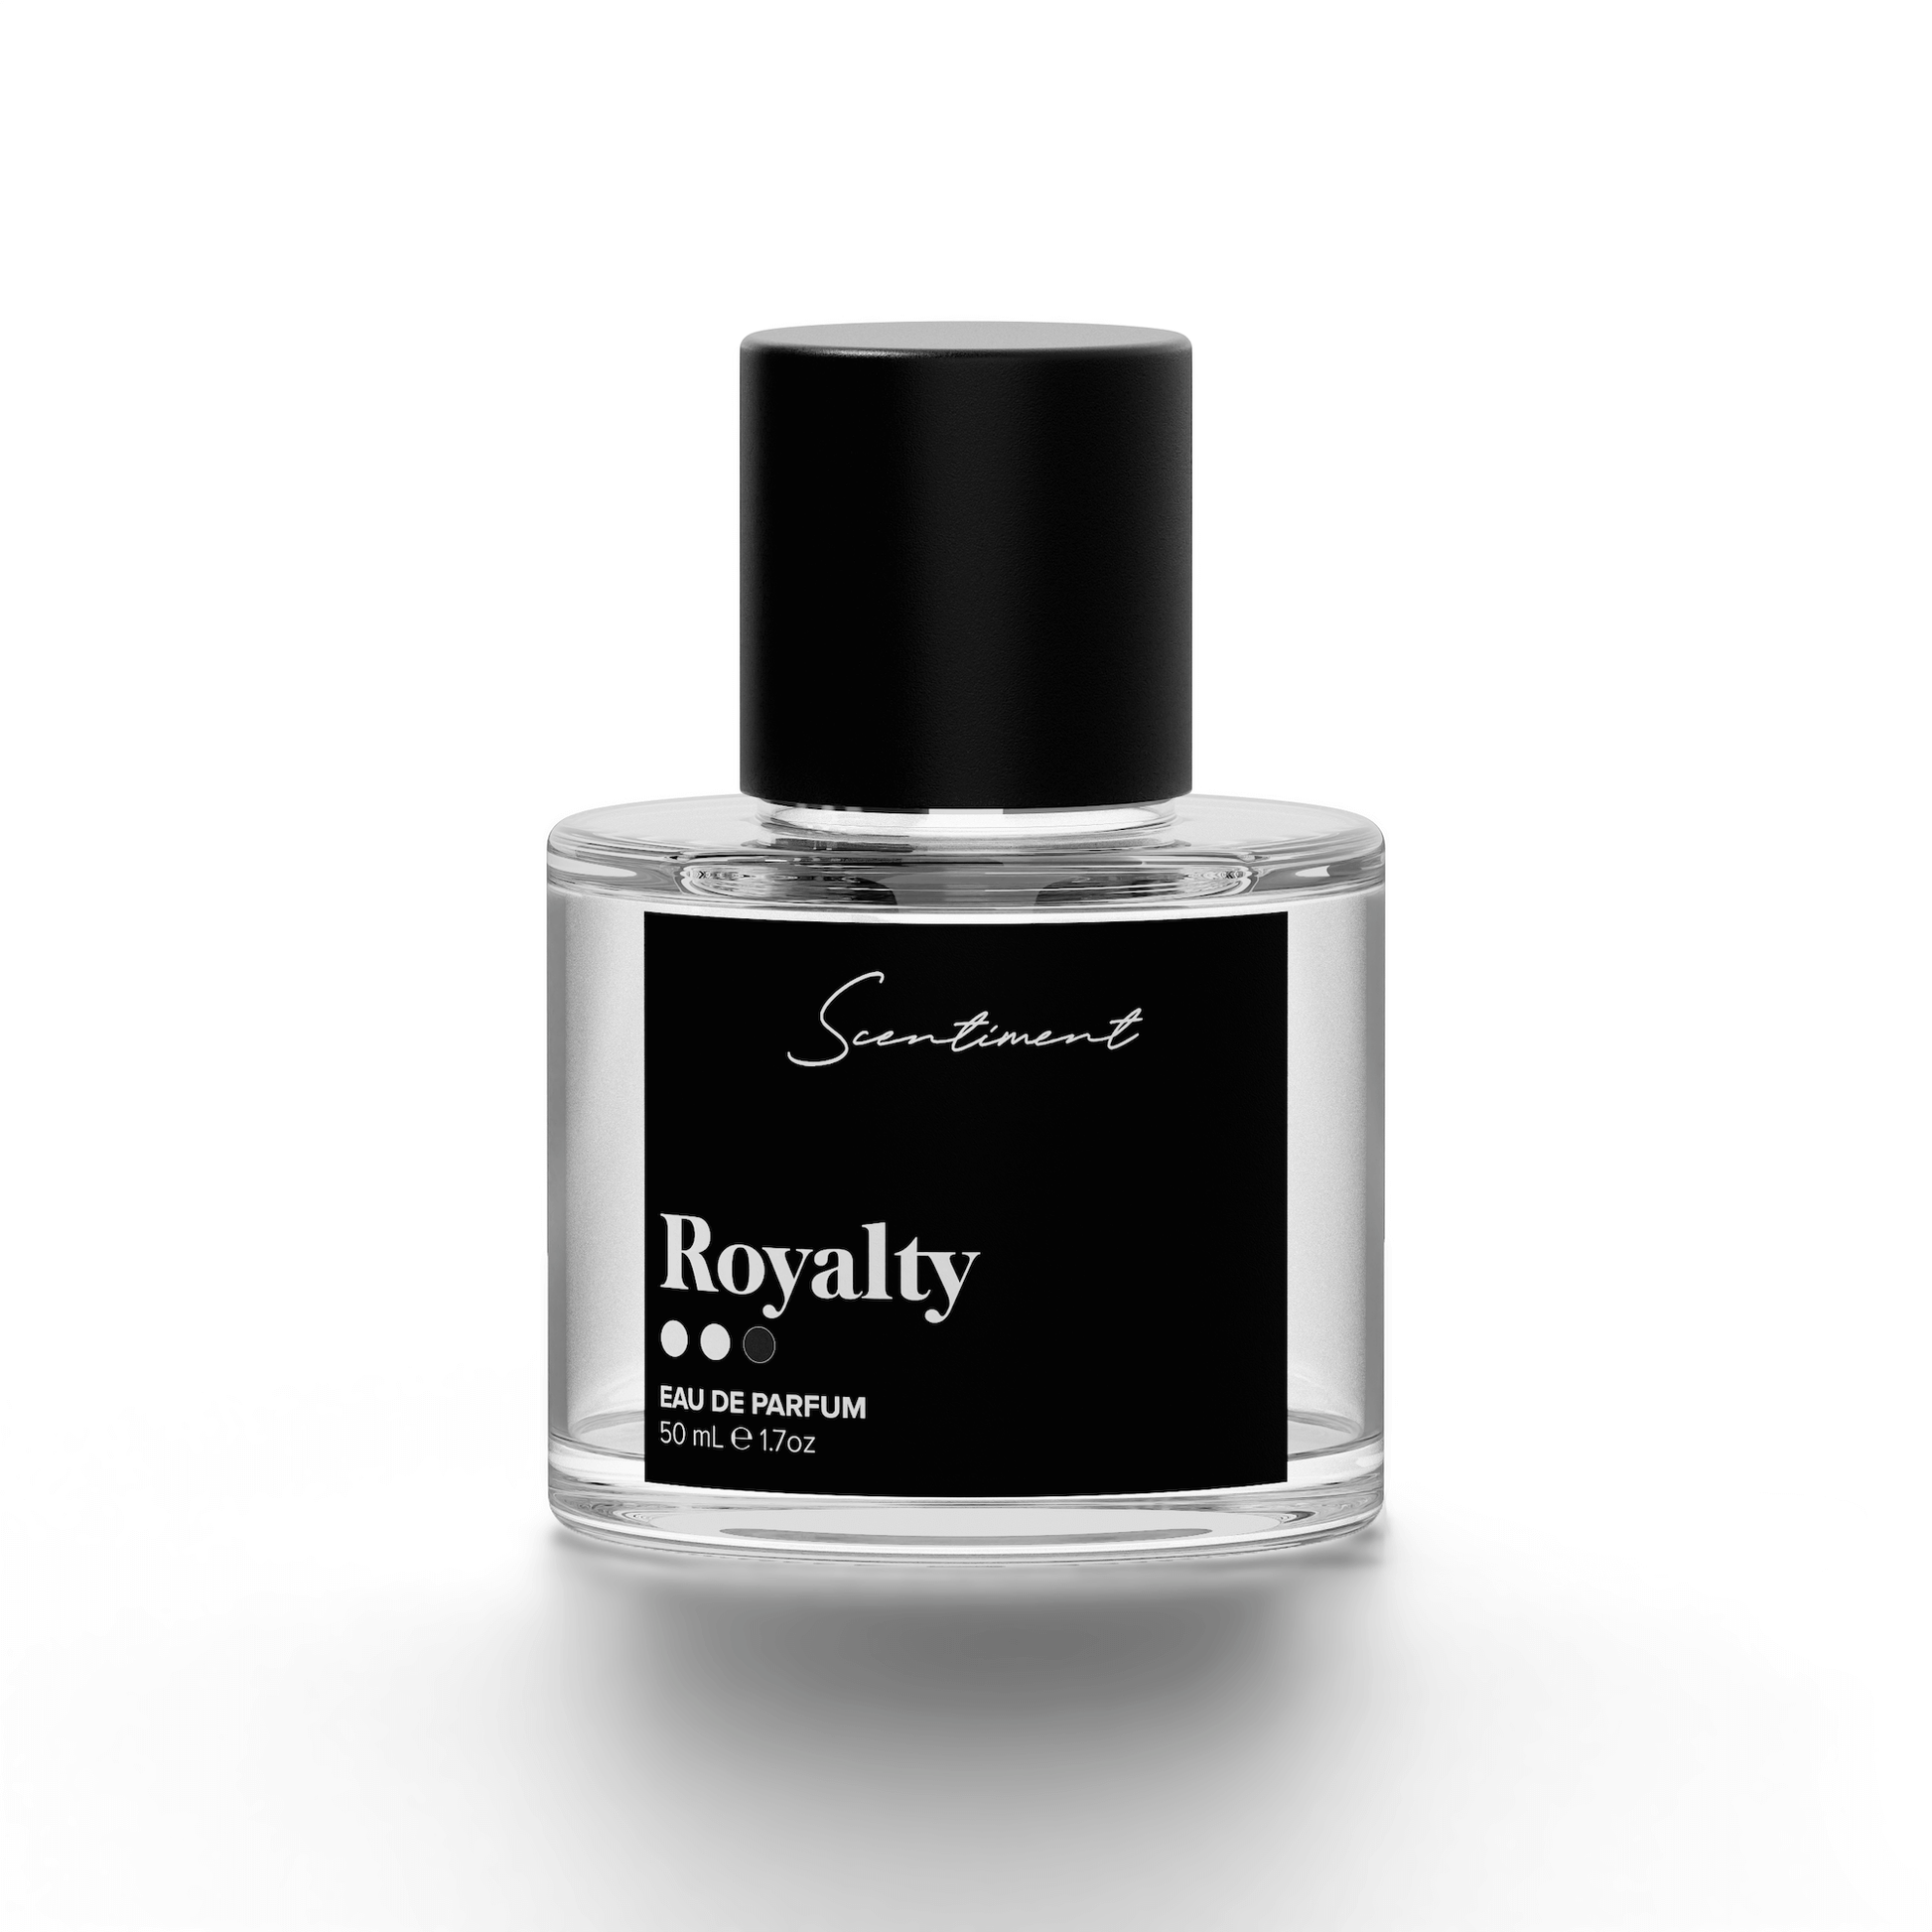 Royalty Body Fragrance, inspired by Creed® Aventus.